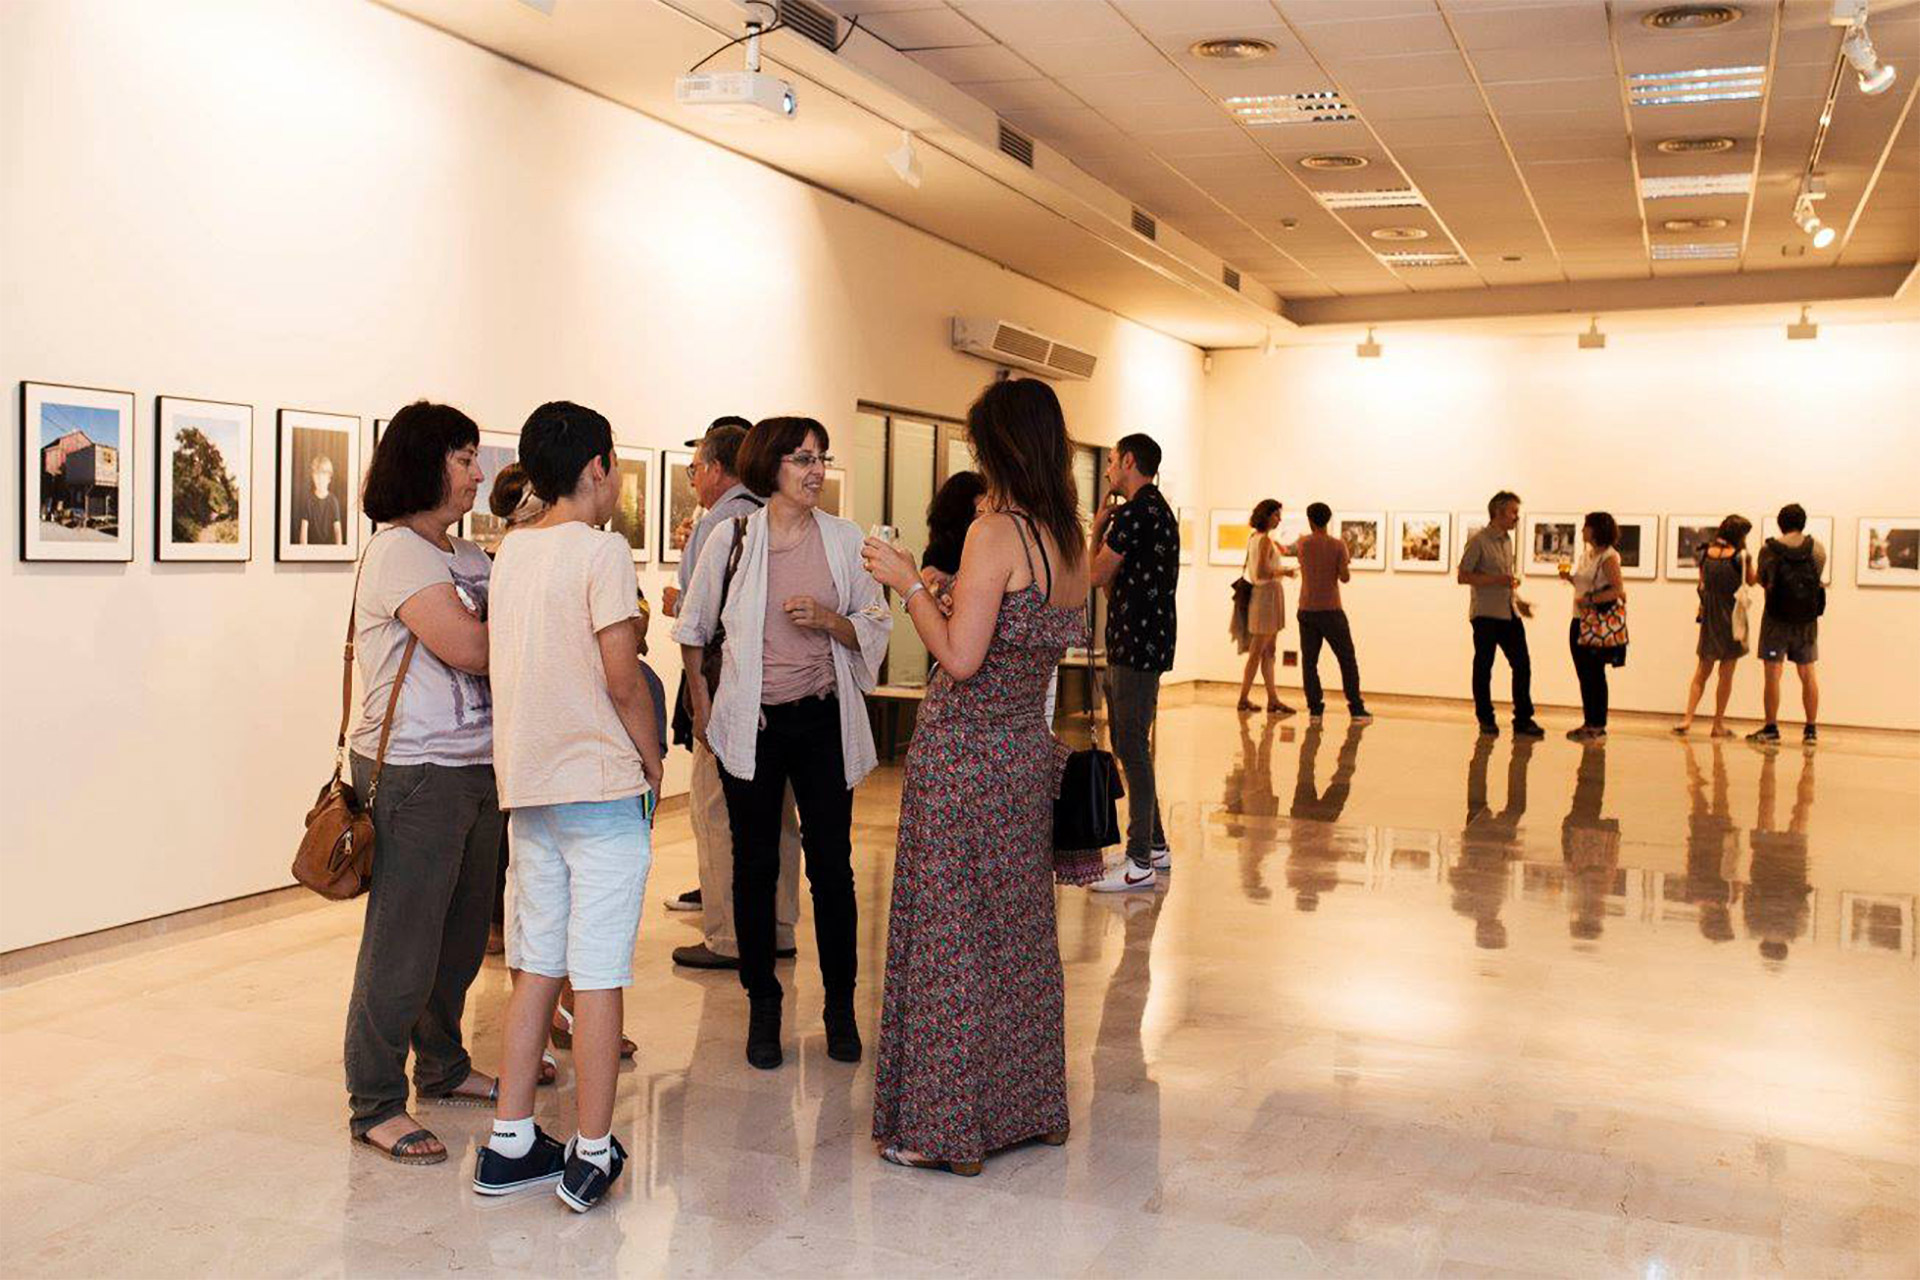 Image of the exhibition curated by the Inesfera studio.